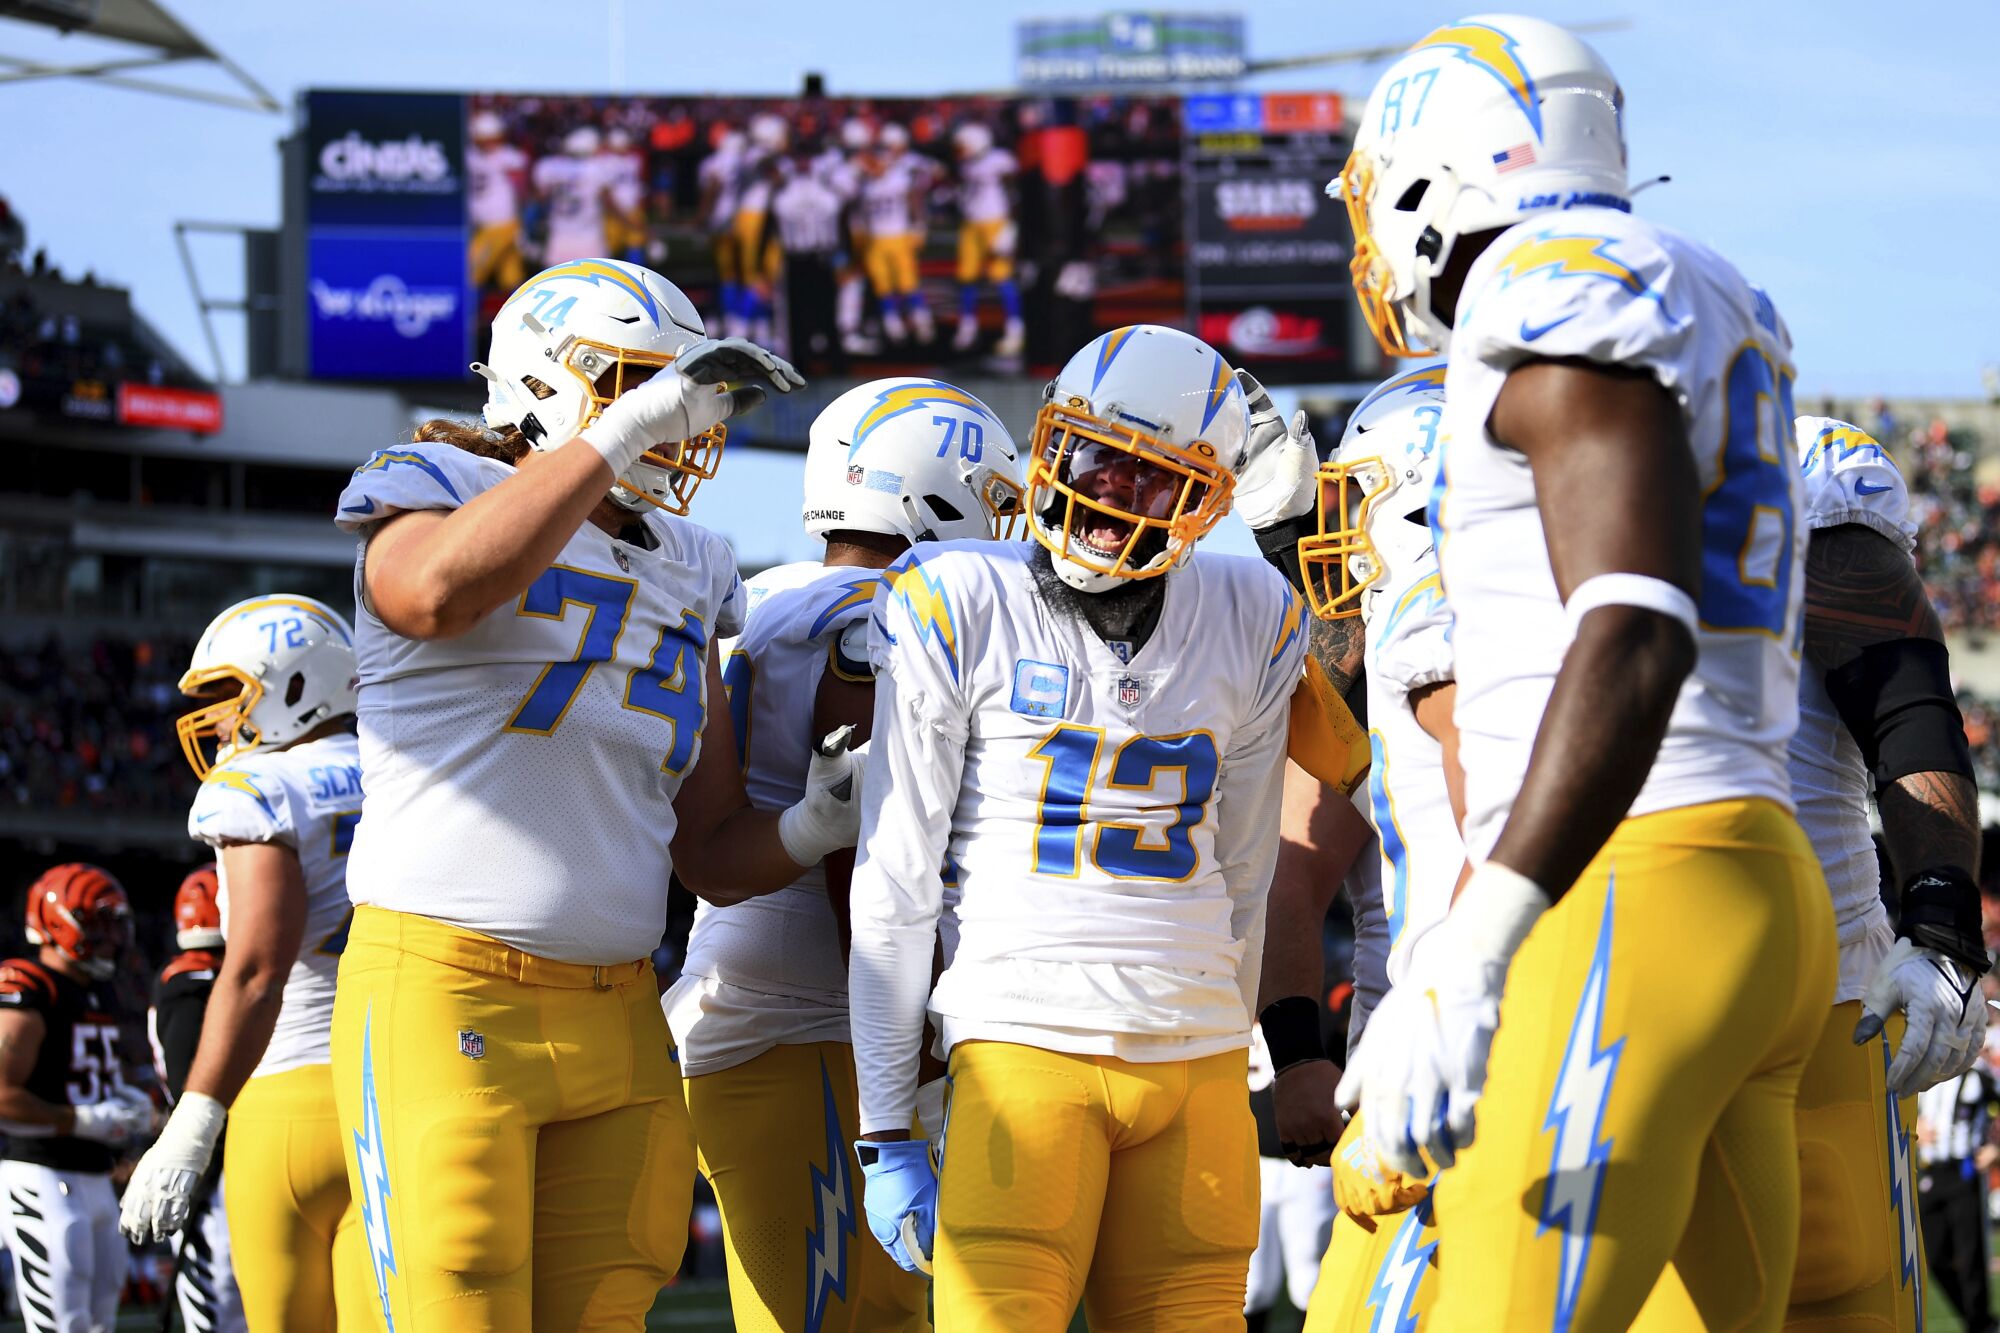 Chargers wide receiver Keenan Allen celebrates his touchdown.